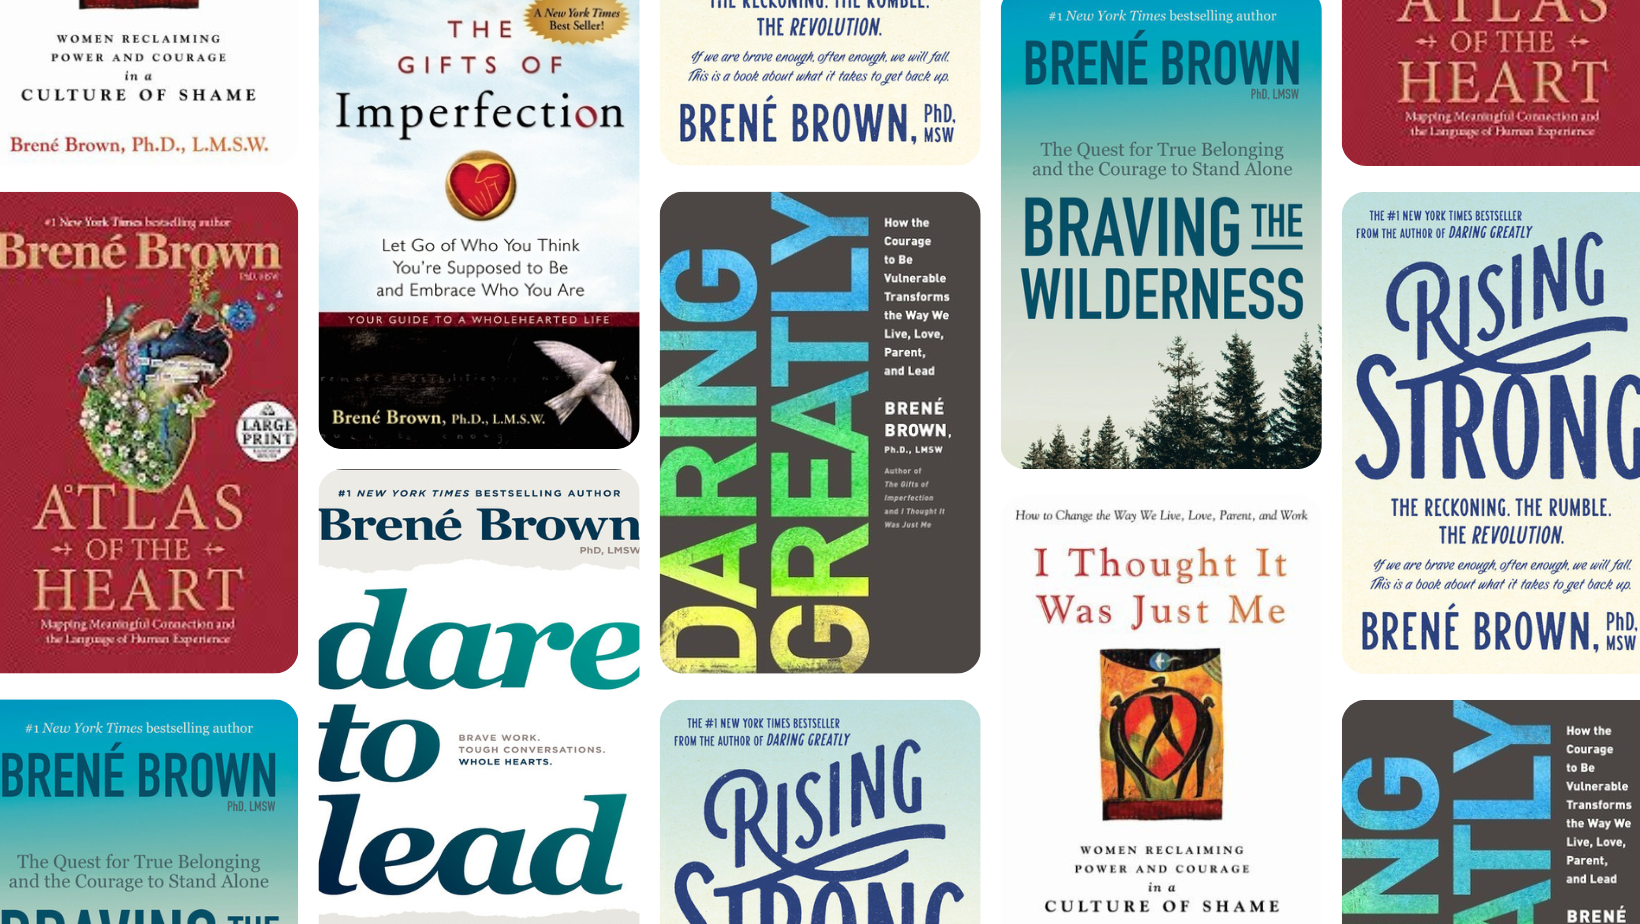 Brené Brown’s Books Ranked In Order of Most Valuable